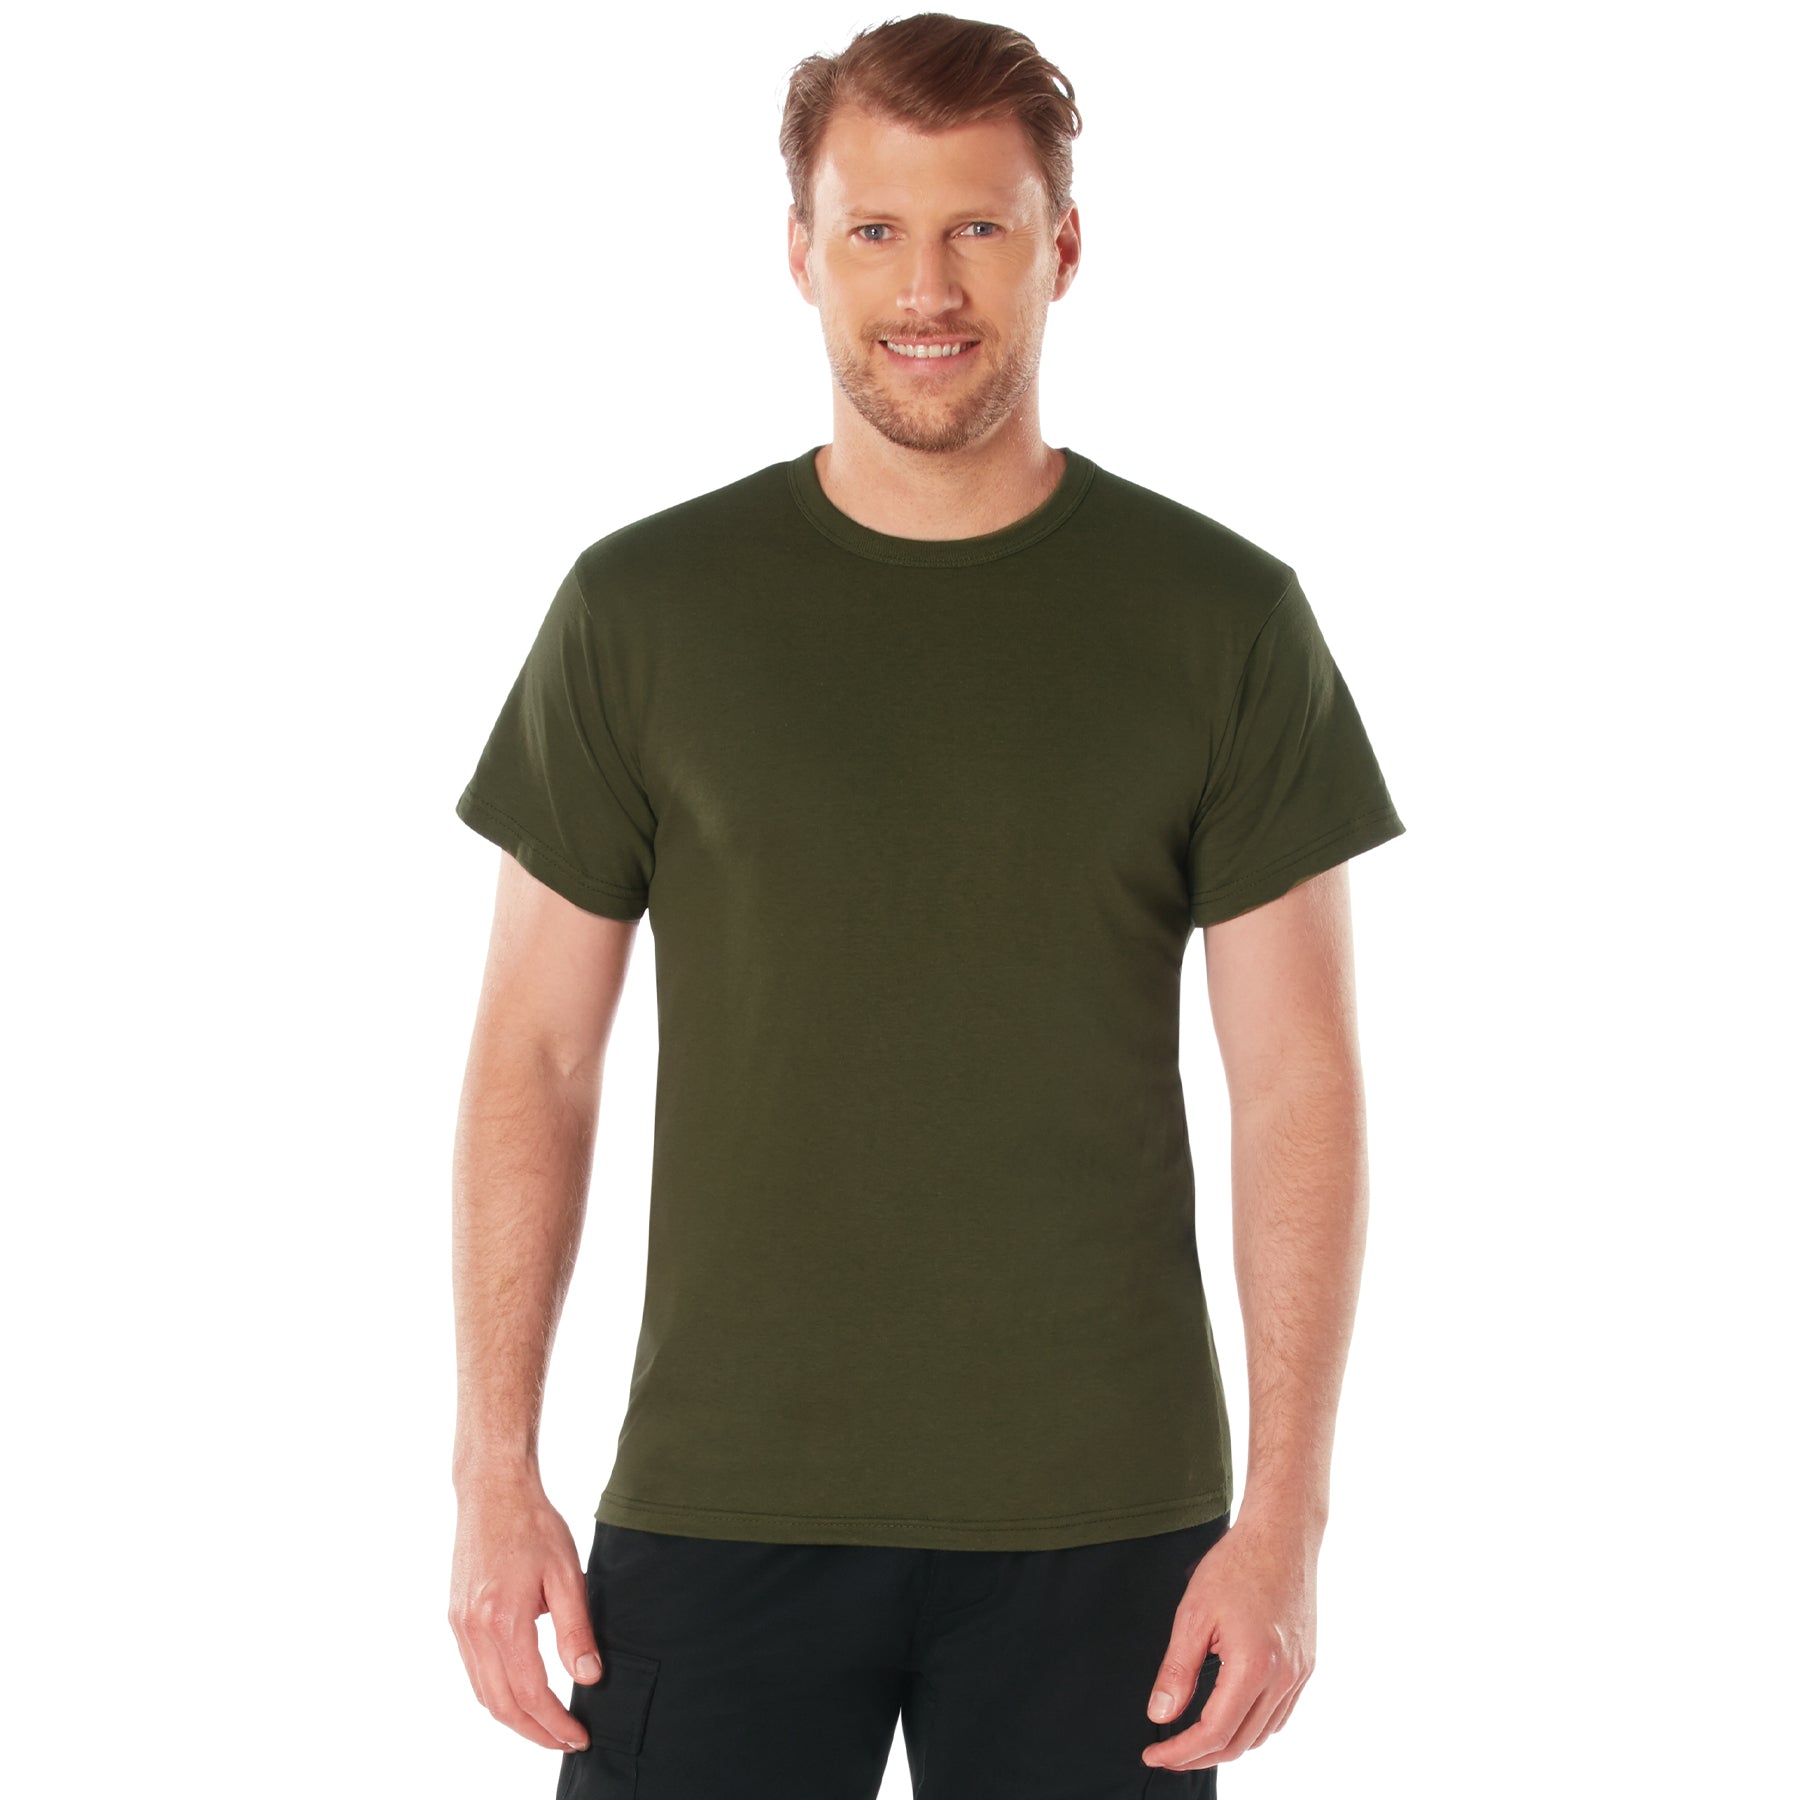 [AR 670-1] Poly Moisture Wicking T-Shirts Olive Drab